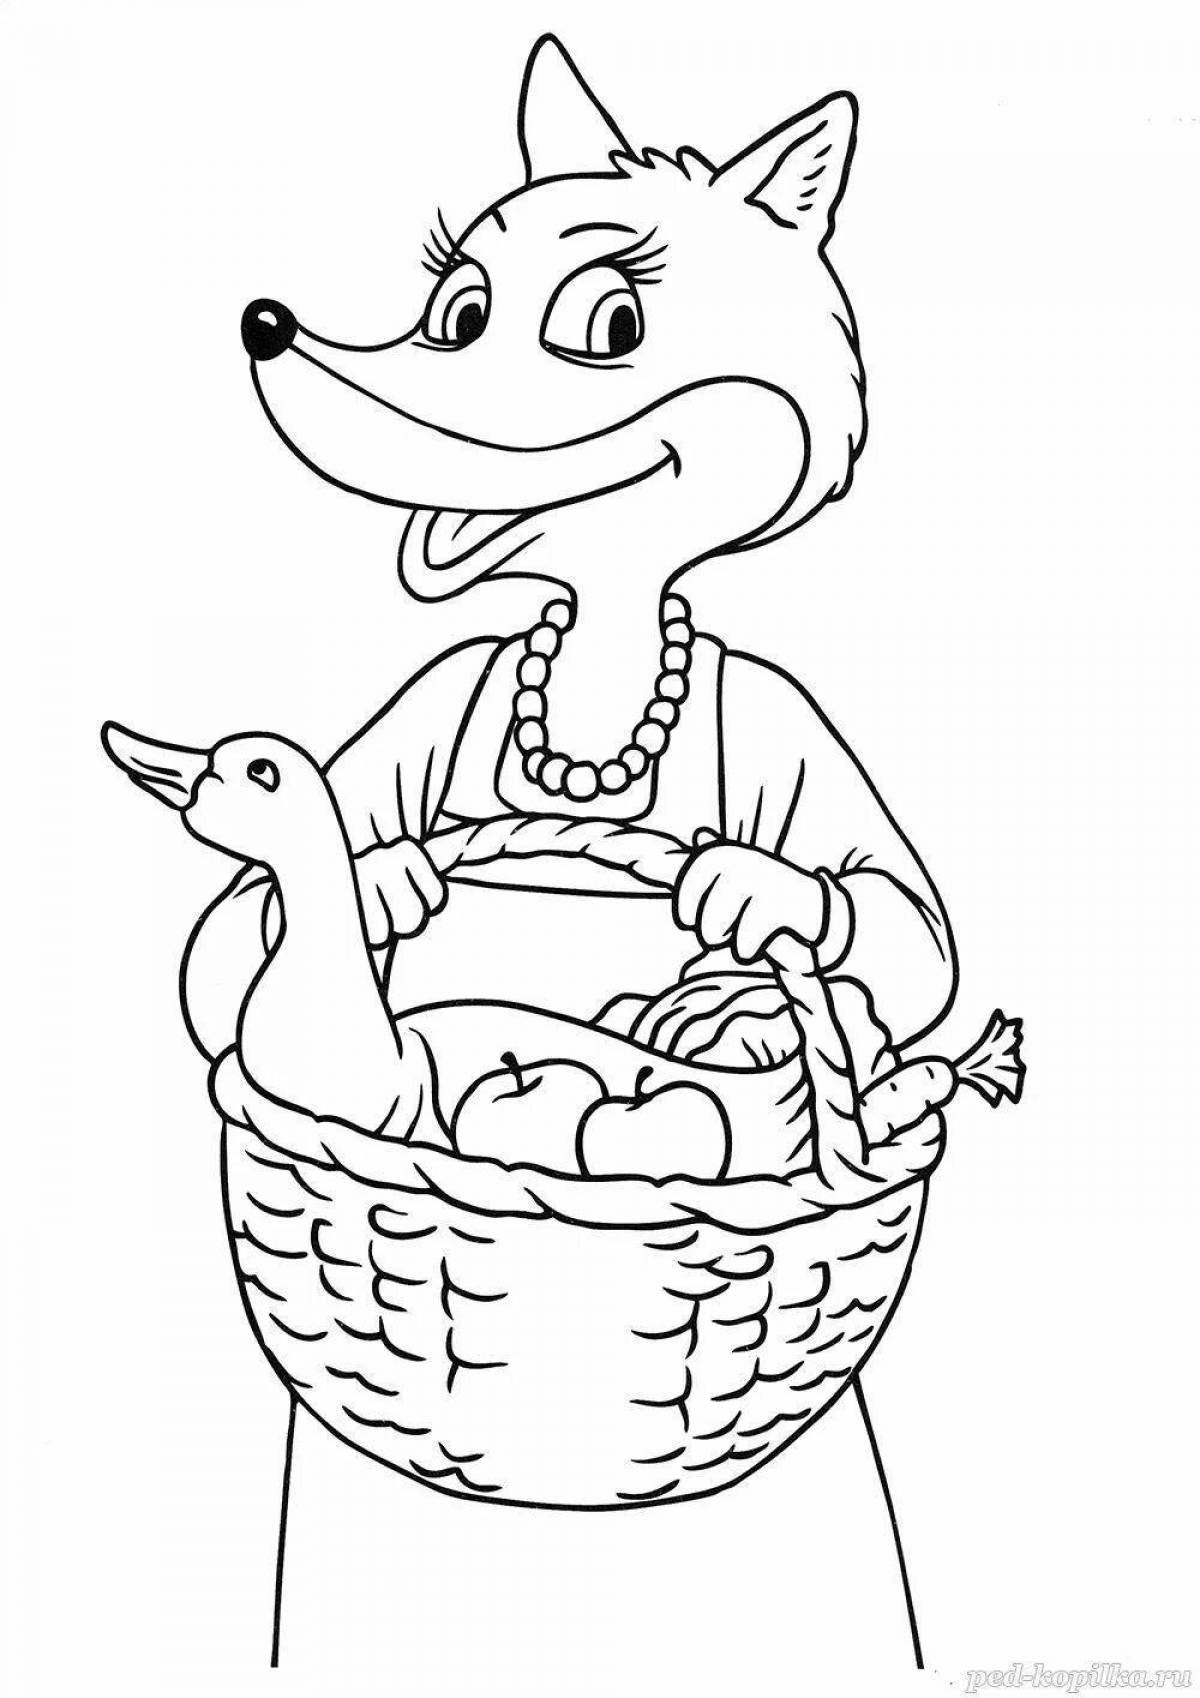 Colorful fox and rabbit coloring page